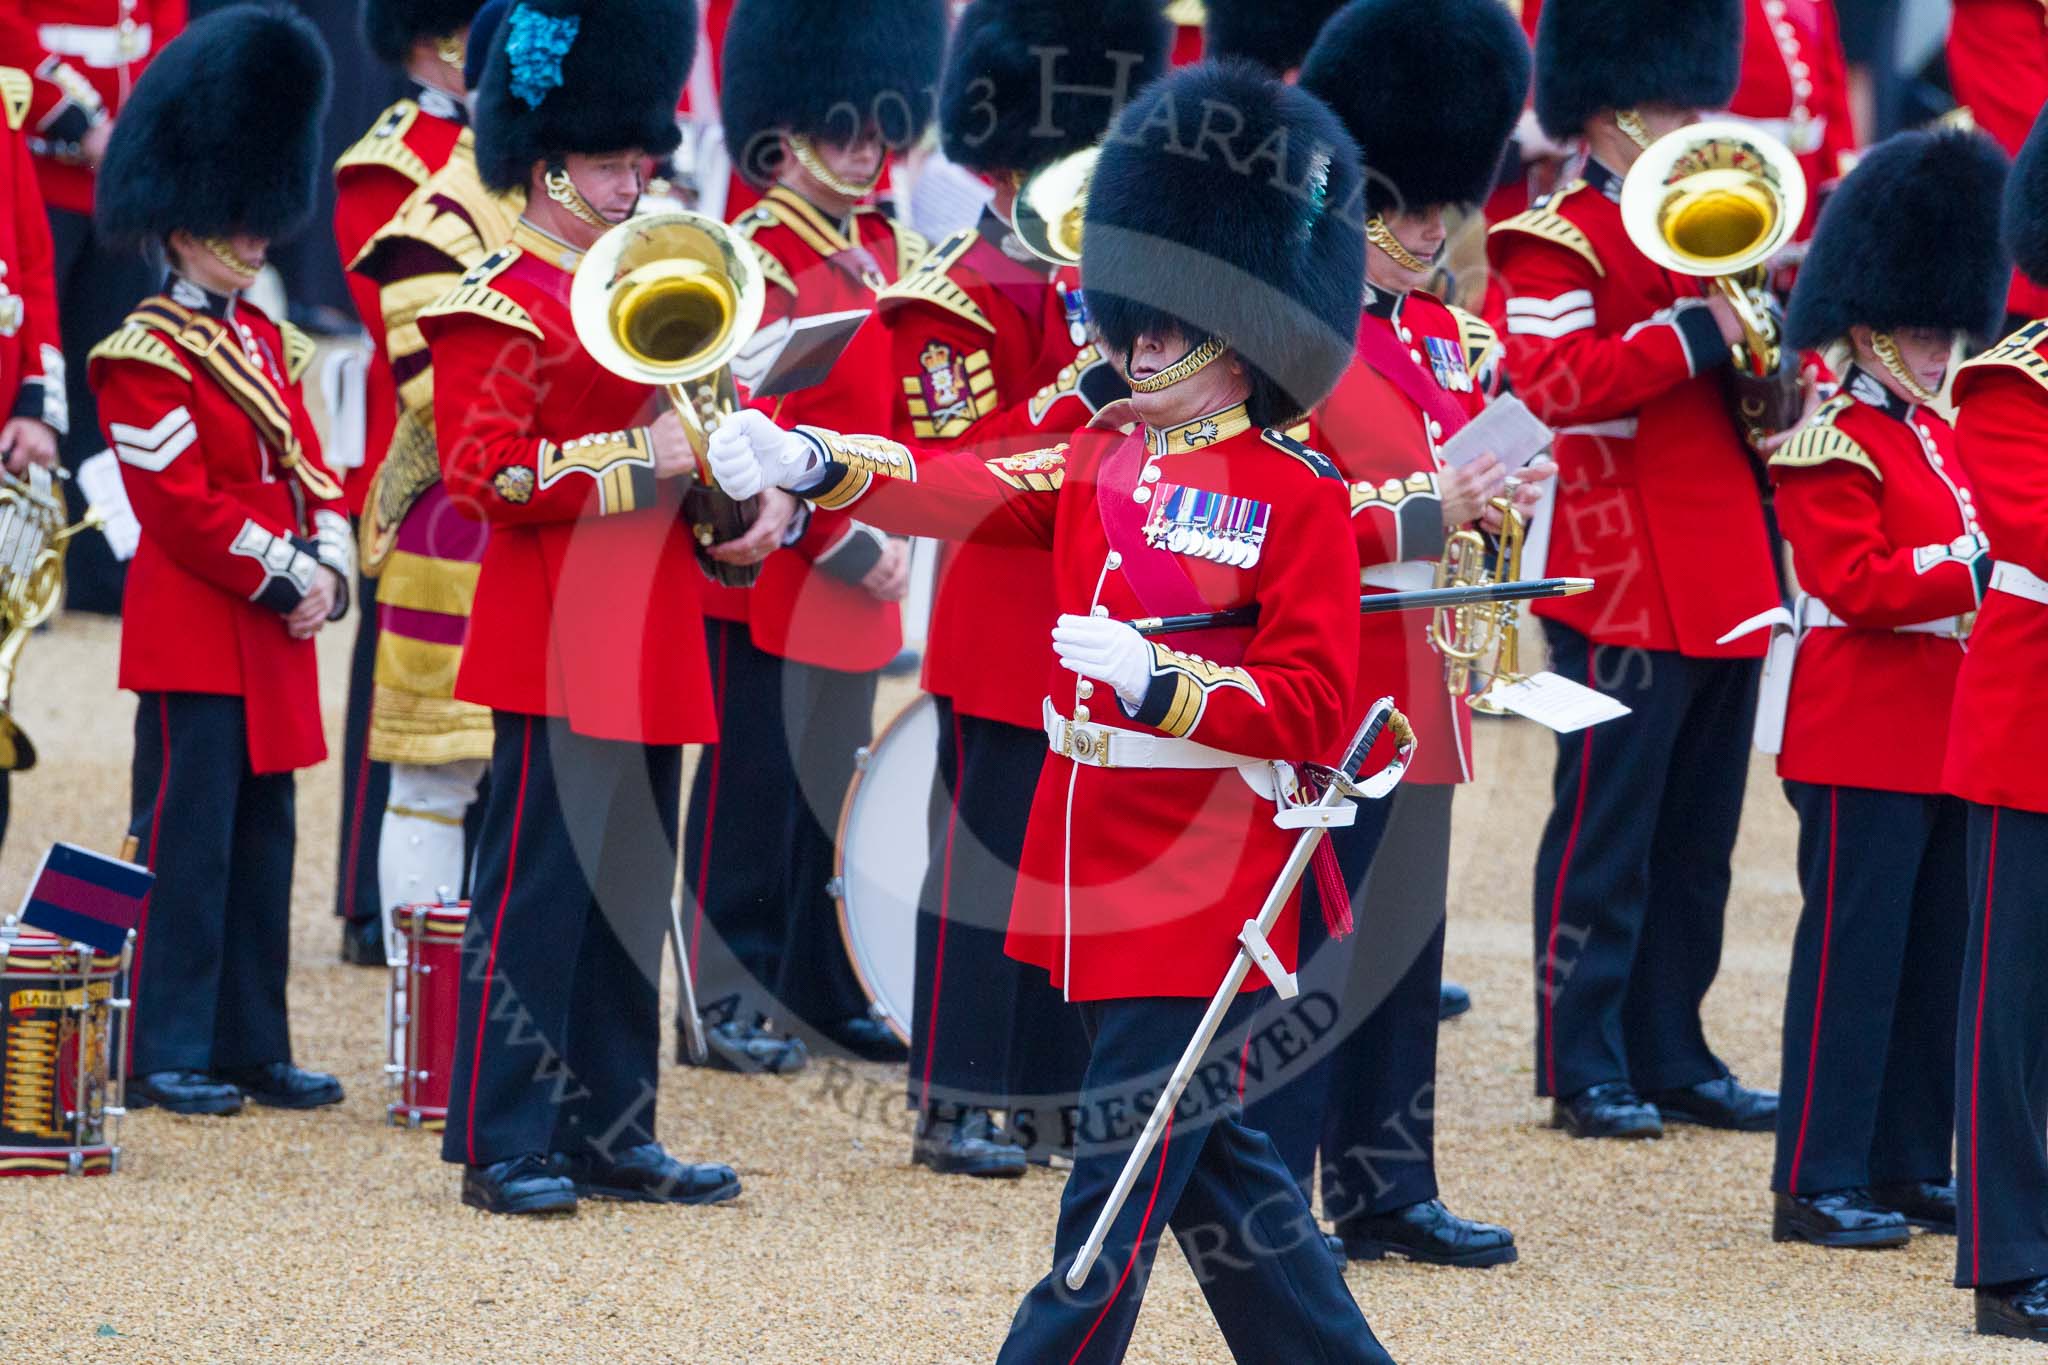 Trooping the Colour 2015. Image #69, 13 June 2015 10:20 Horse Guards Parade, London, UK